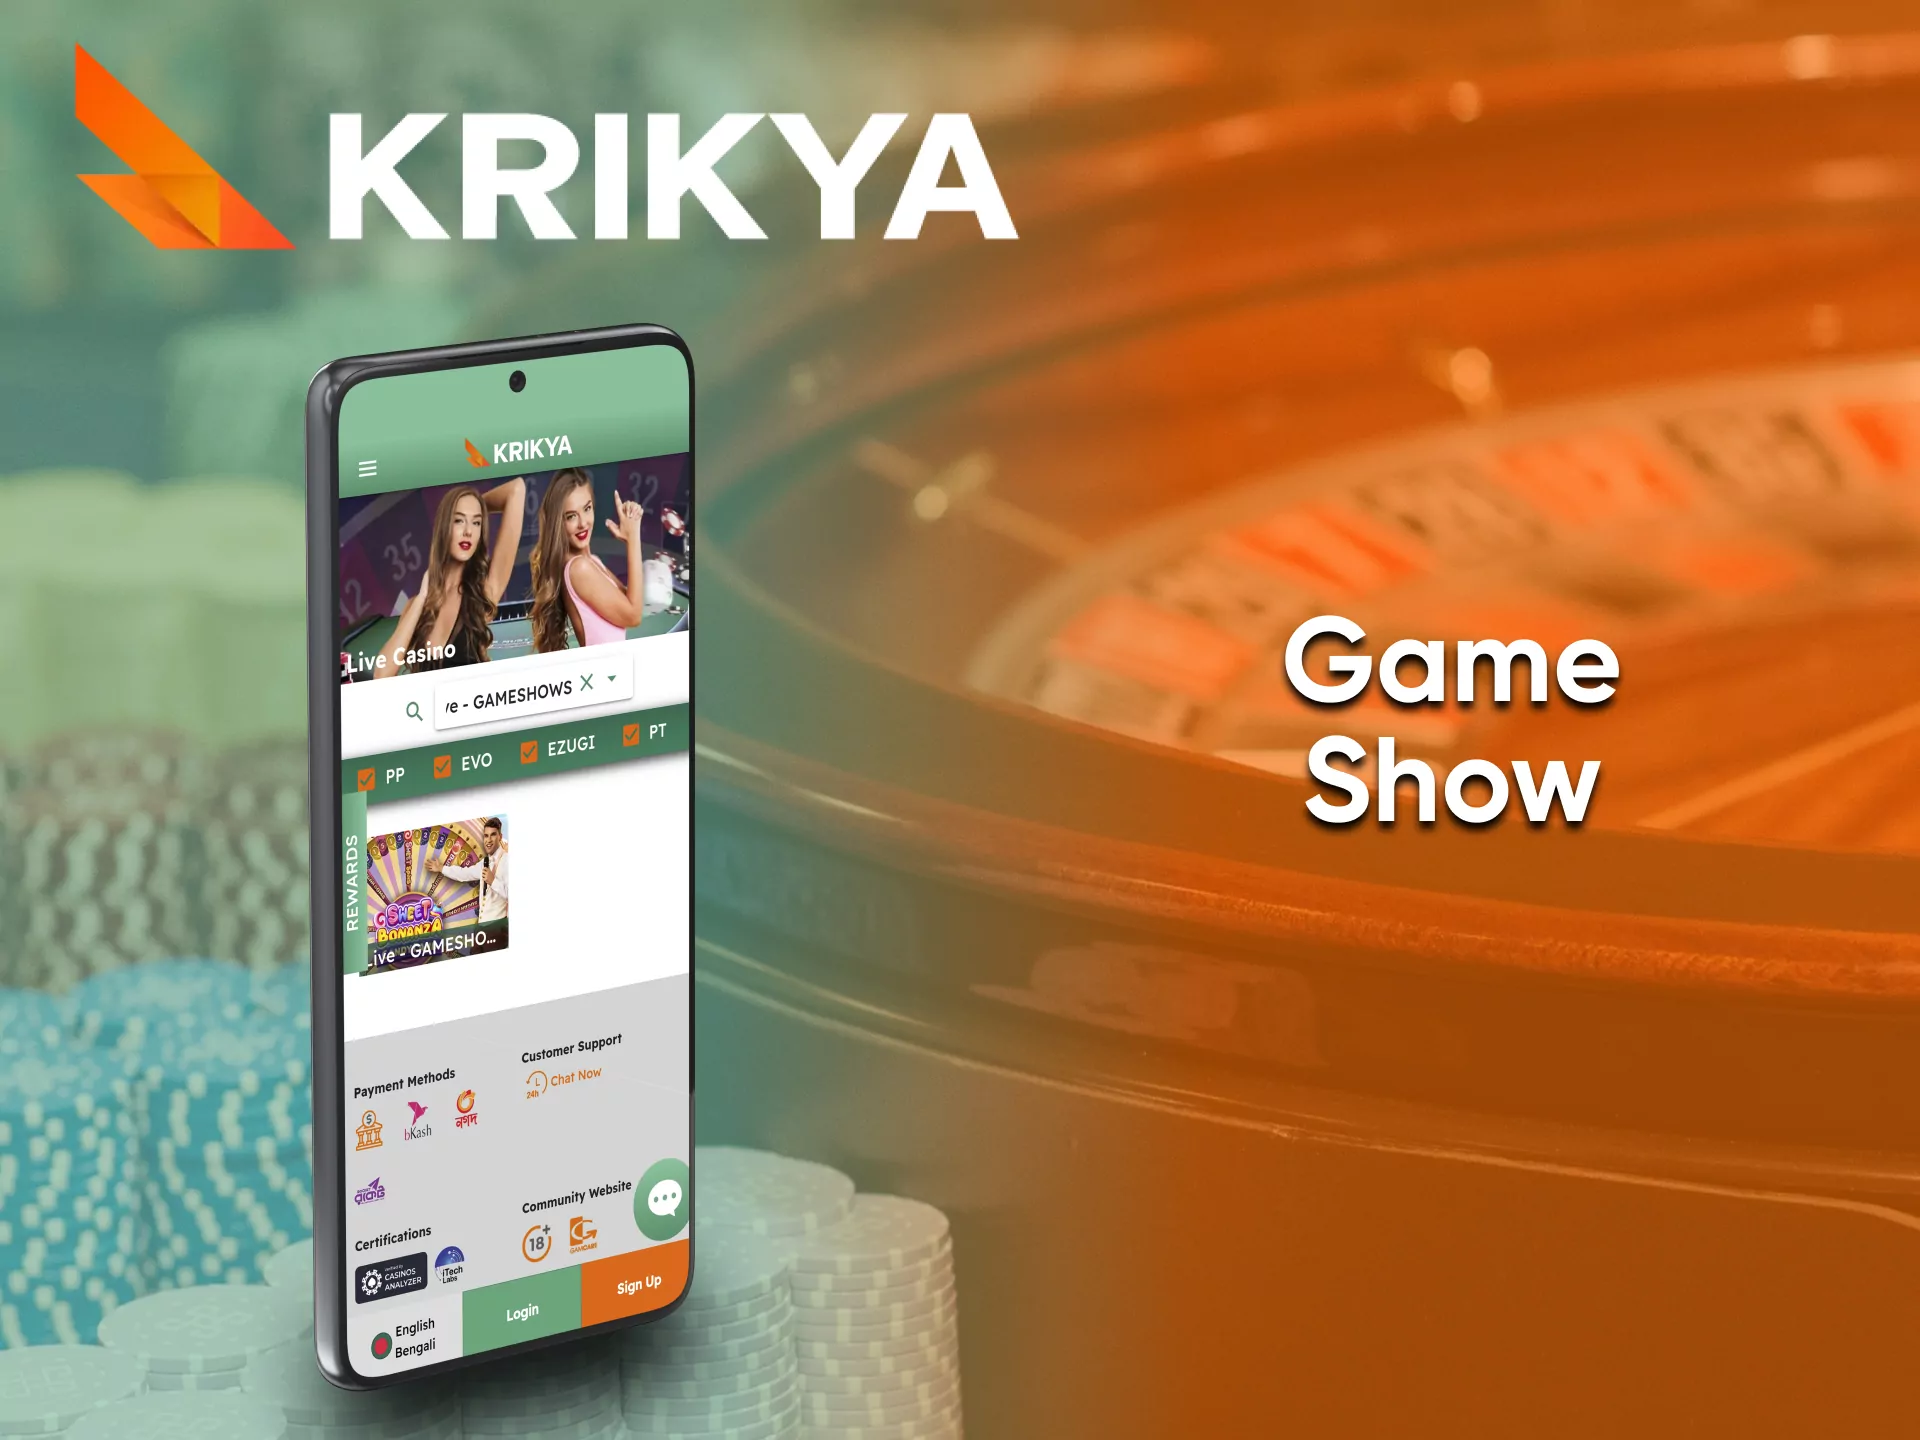 Game Show is a game that you can play through the Krikya app.